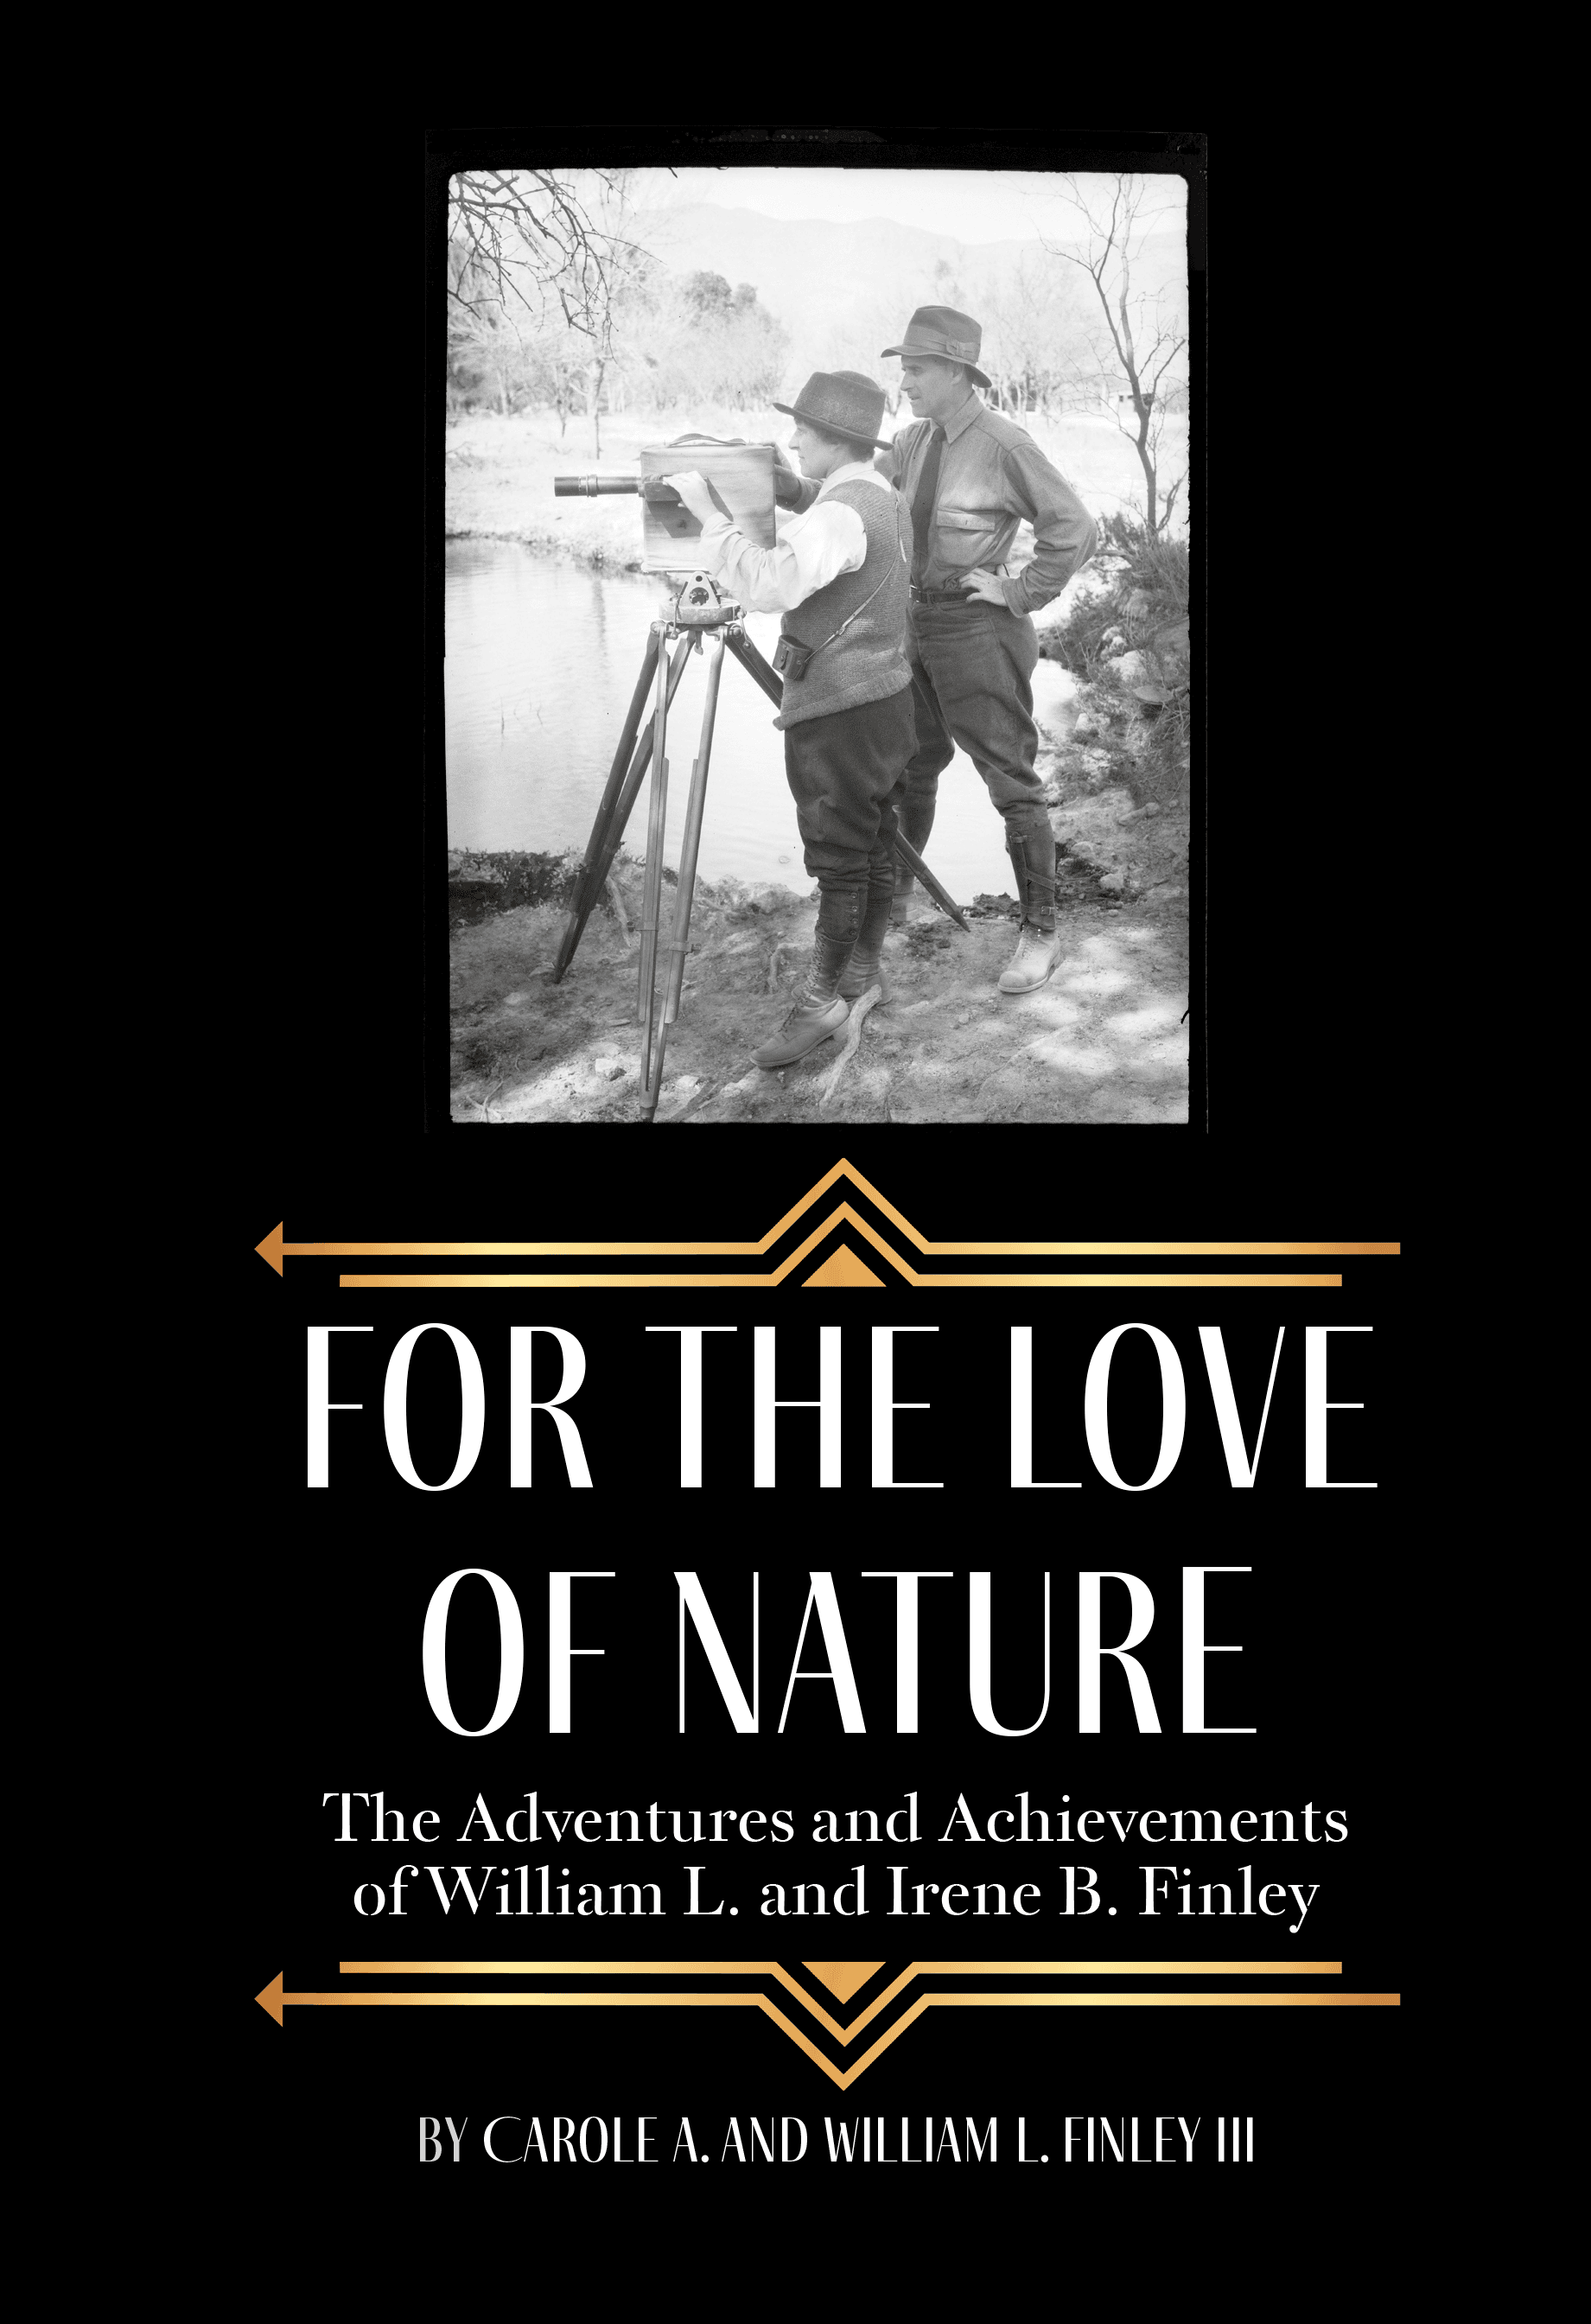 For the Love of Nature